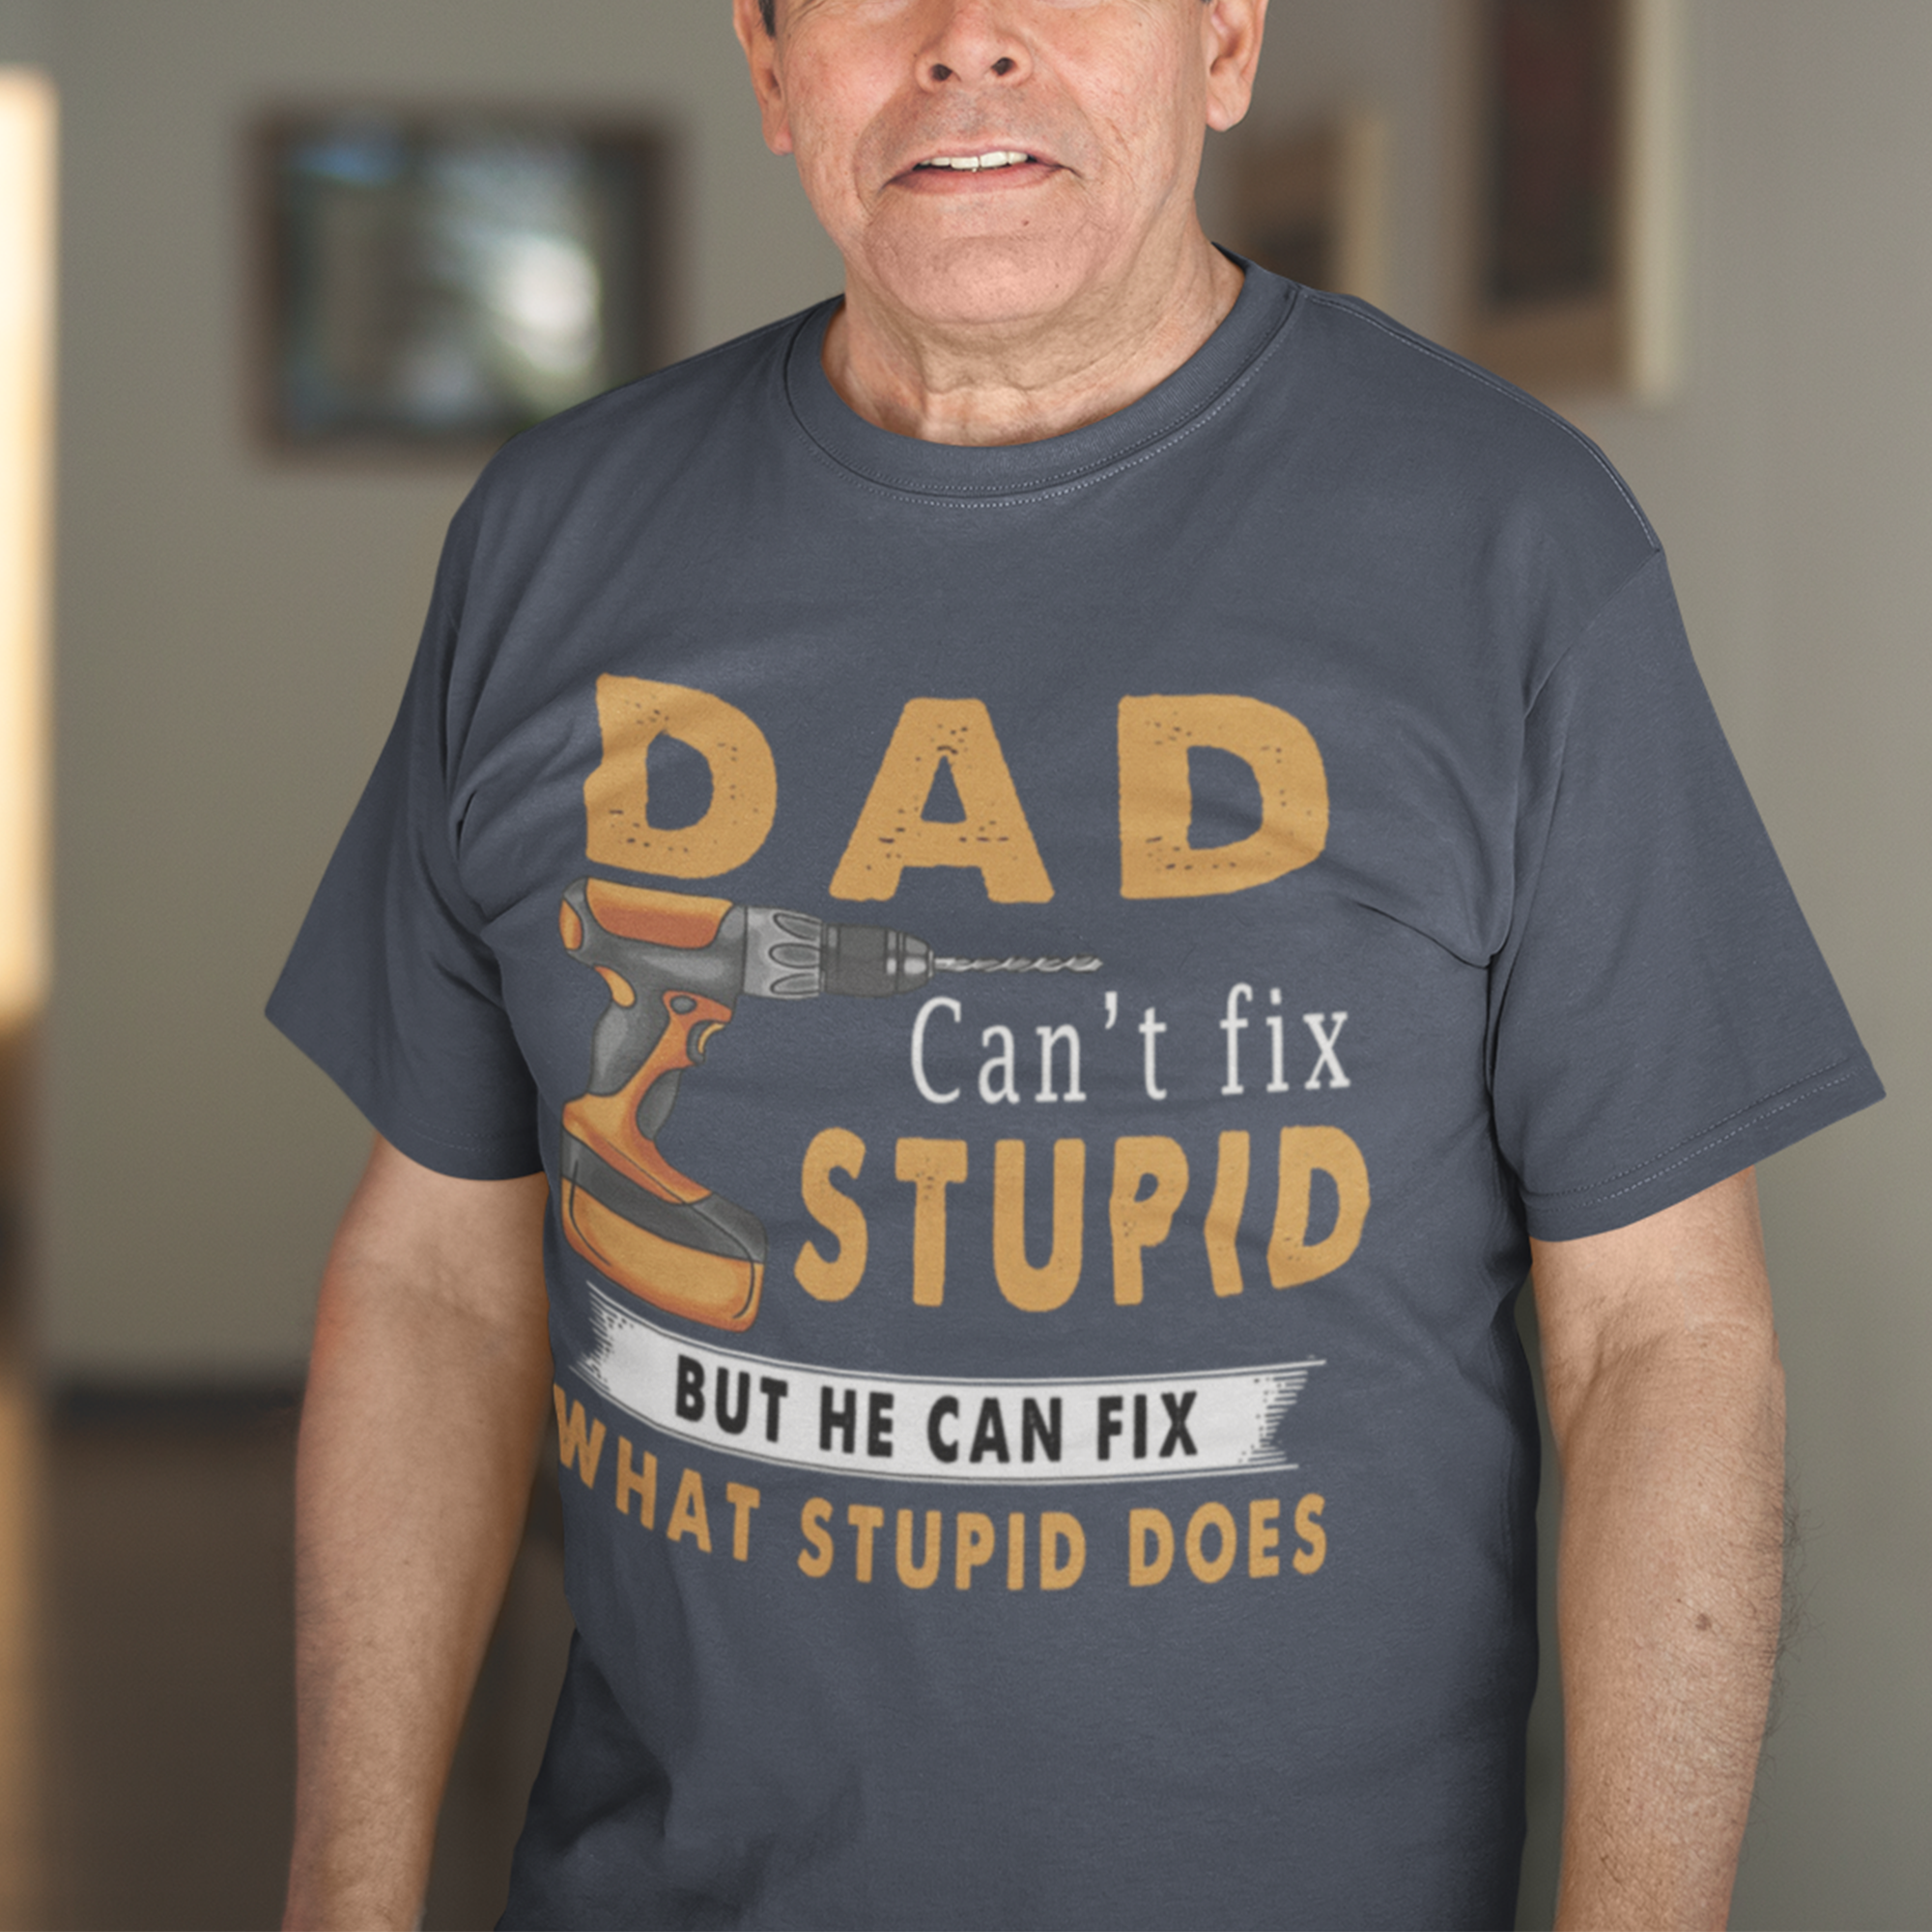 Dad Can't Fix Stupid But He Can Fix What Stupid Does Shirt, Father's Day Gift